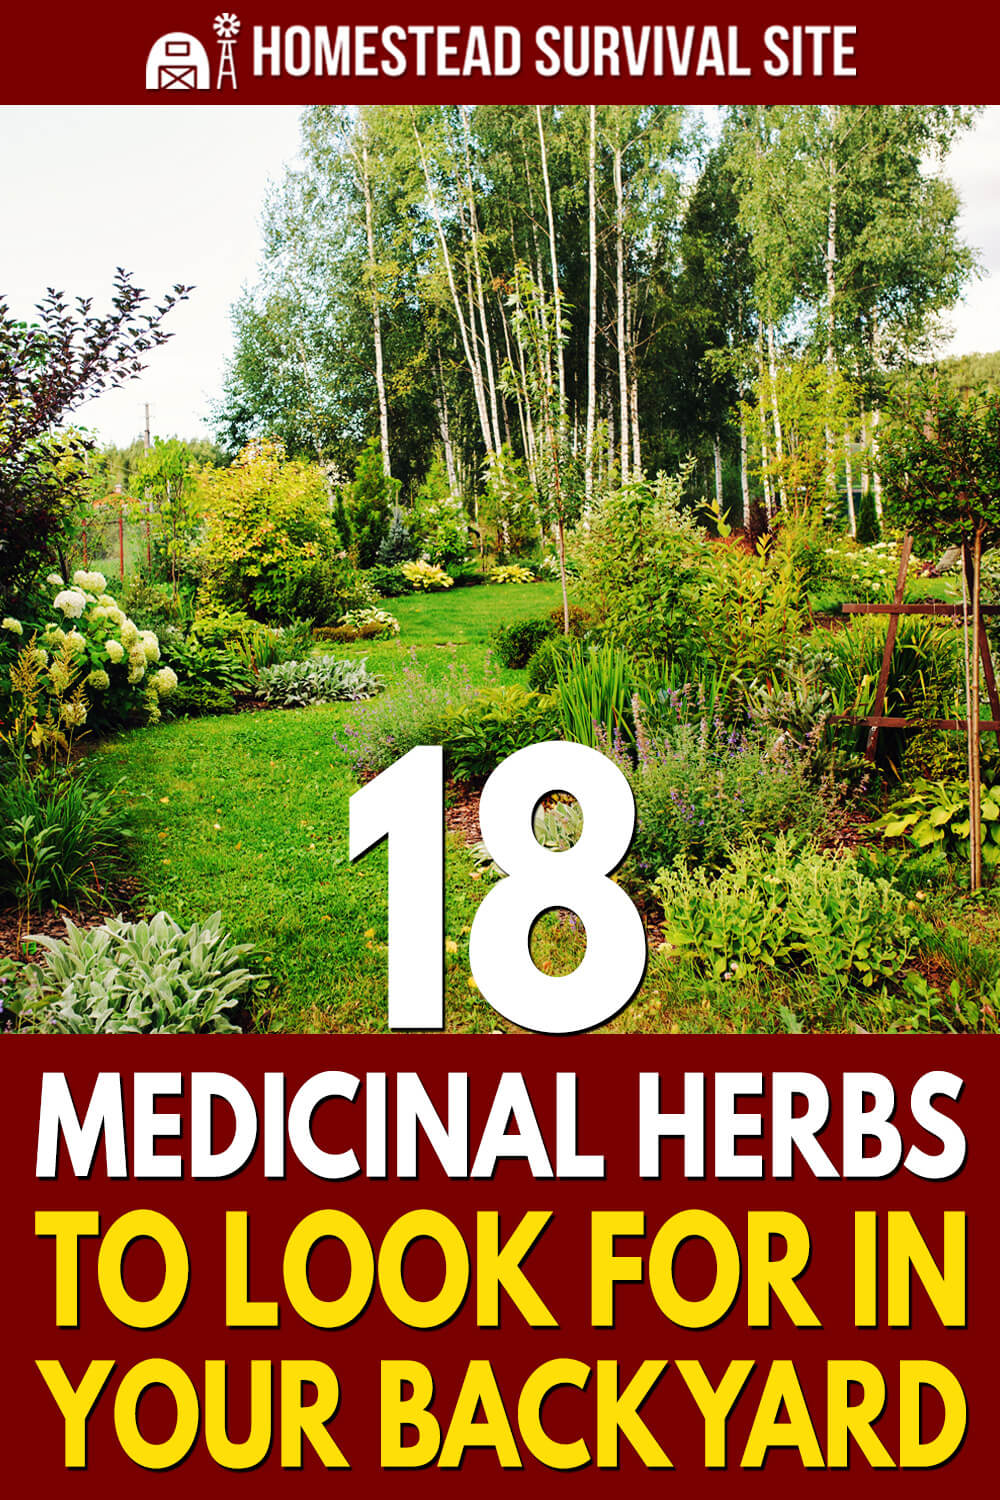 18 Medicinal Herbs To Look For In Your Backyard